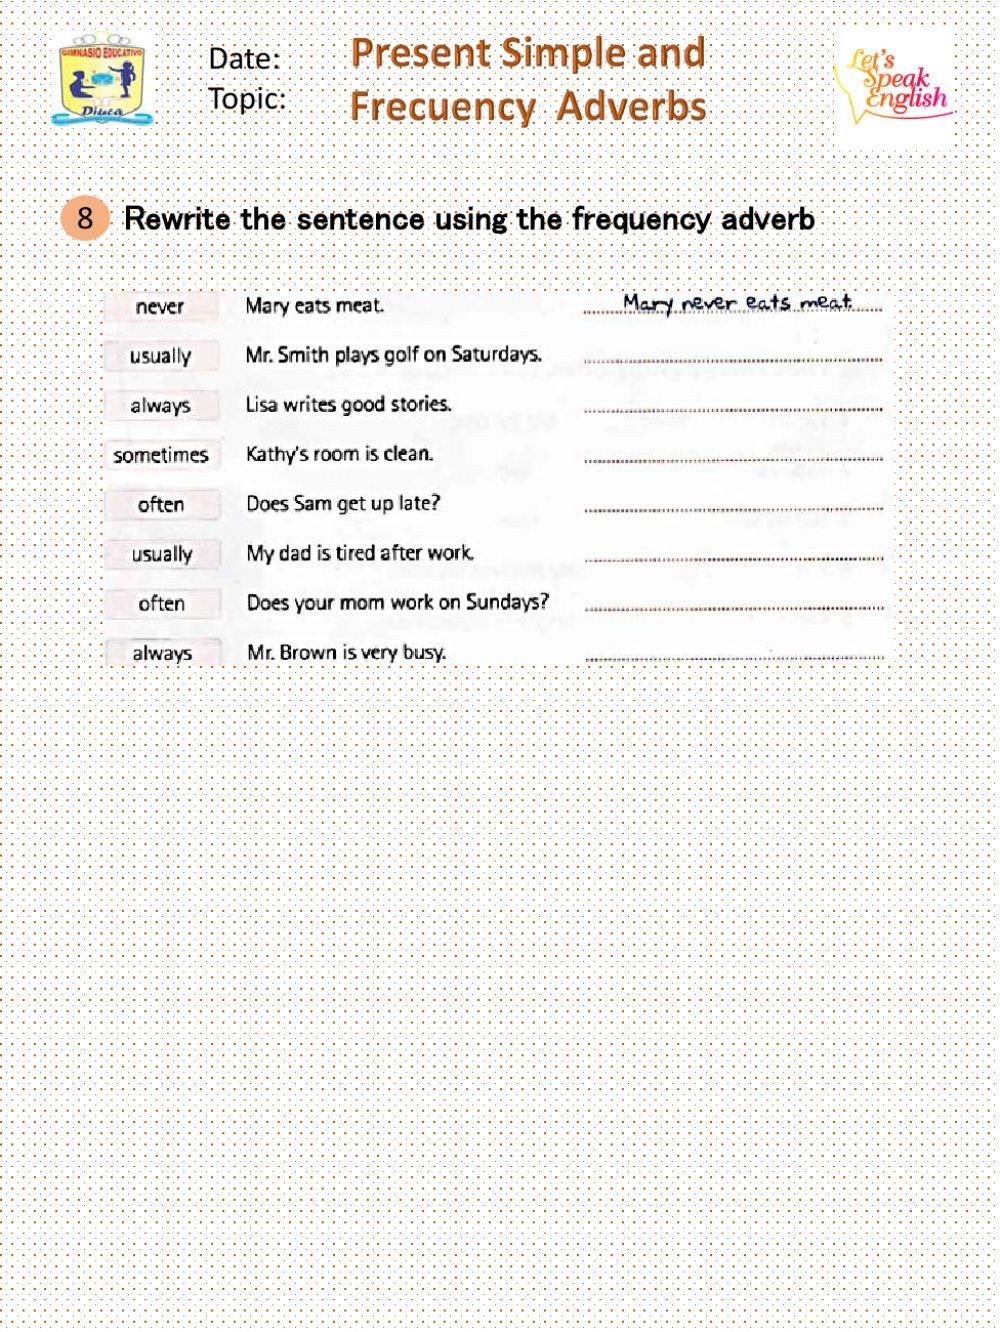 Present Simple and Adverbs of frequency